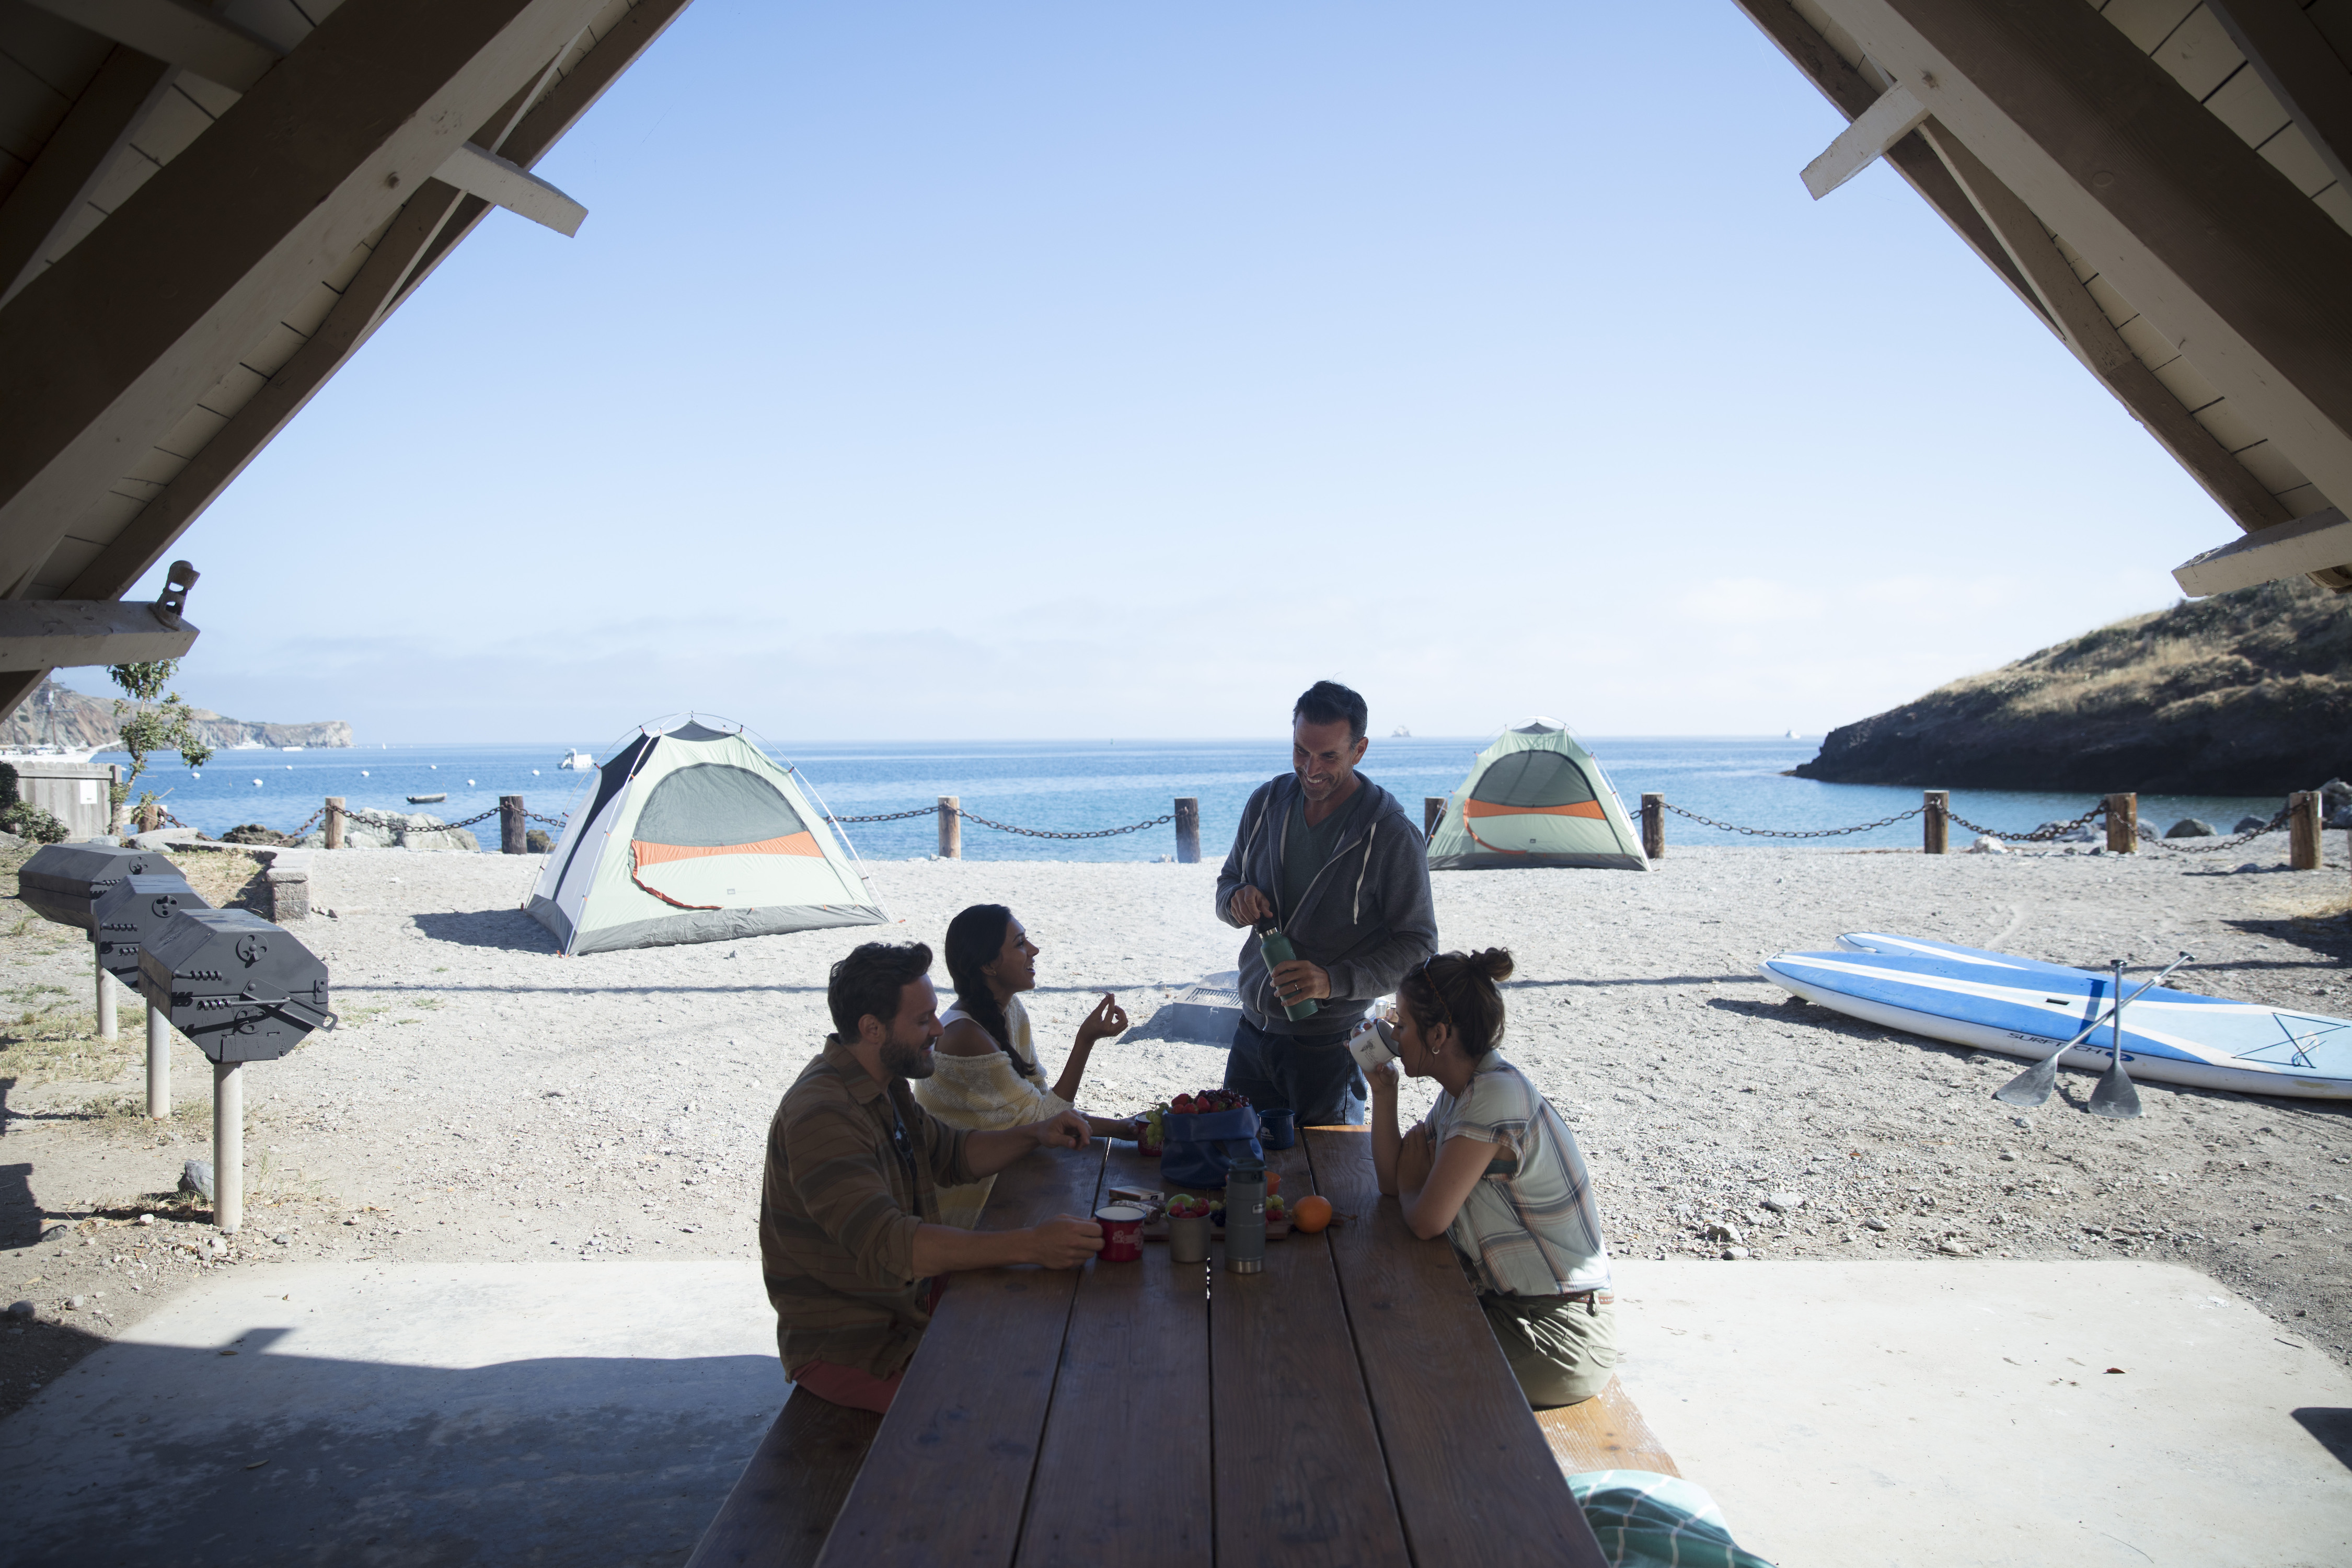 Catalina campgrounds feature something for every type of camper—from natural sites close to the conveniences of town, to rustic and remote sites accessible only by hiking or boating.